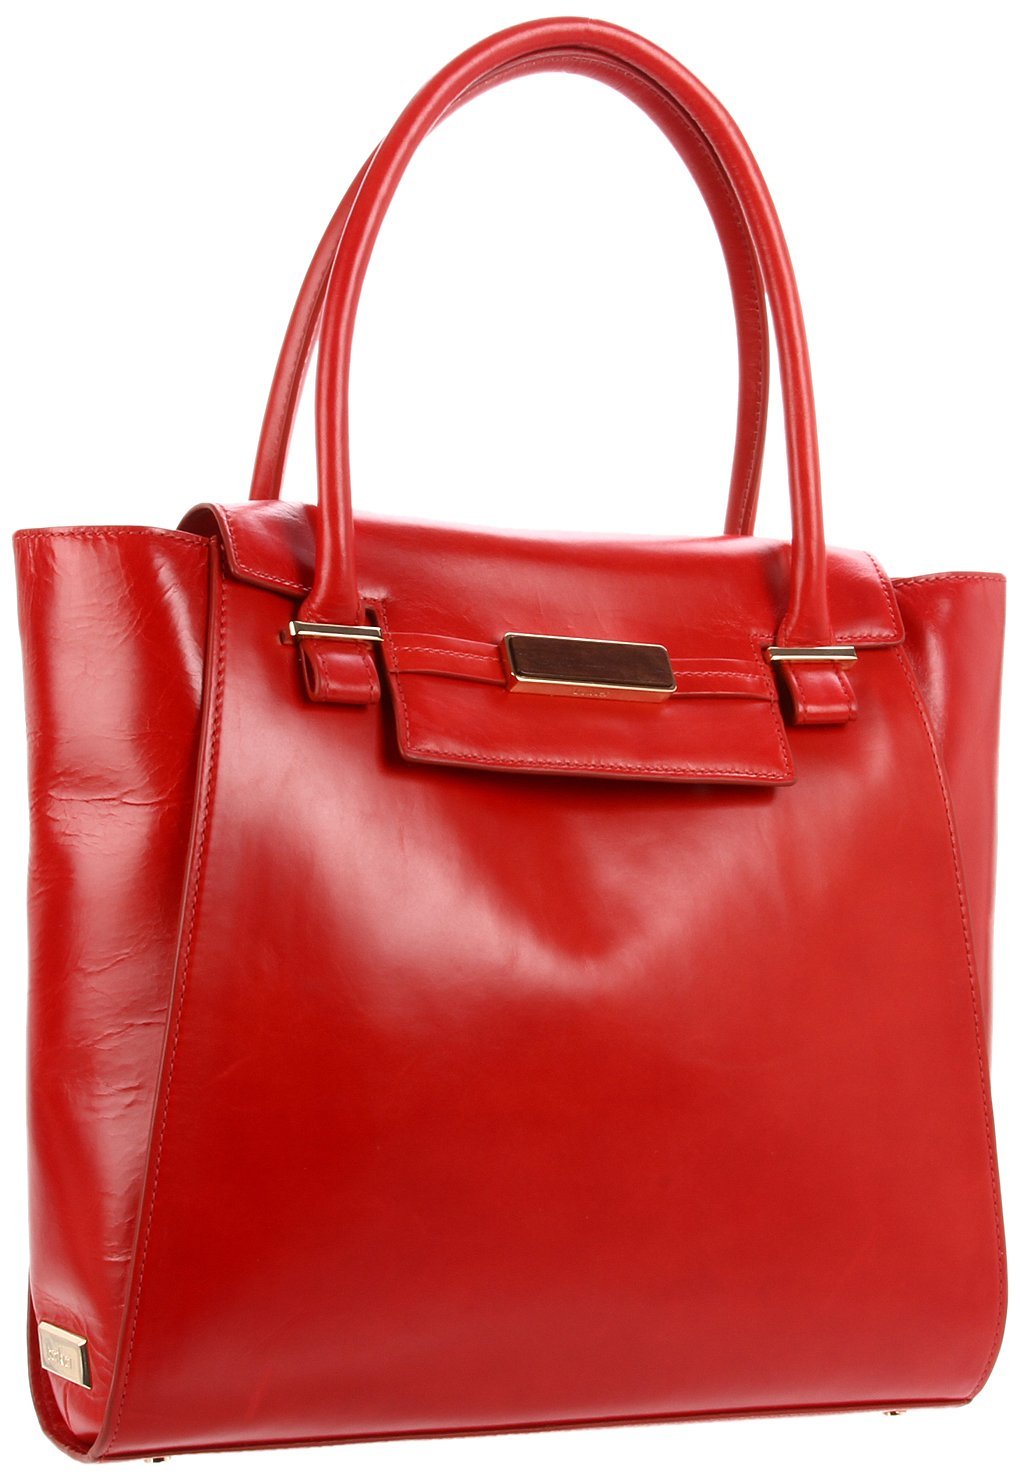 Botkier Cardinal Leather Nicola Foldover Flap Tote in Red (cardinal) | Lyst